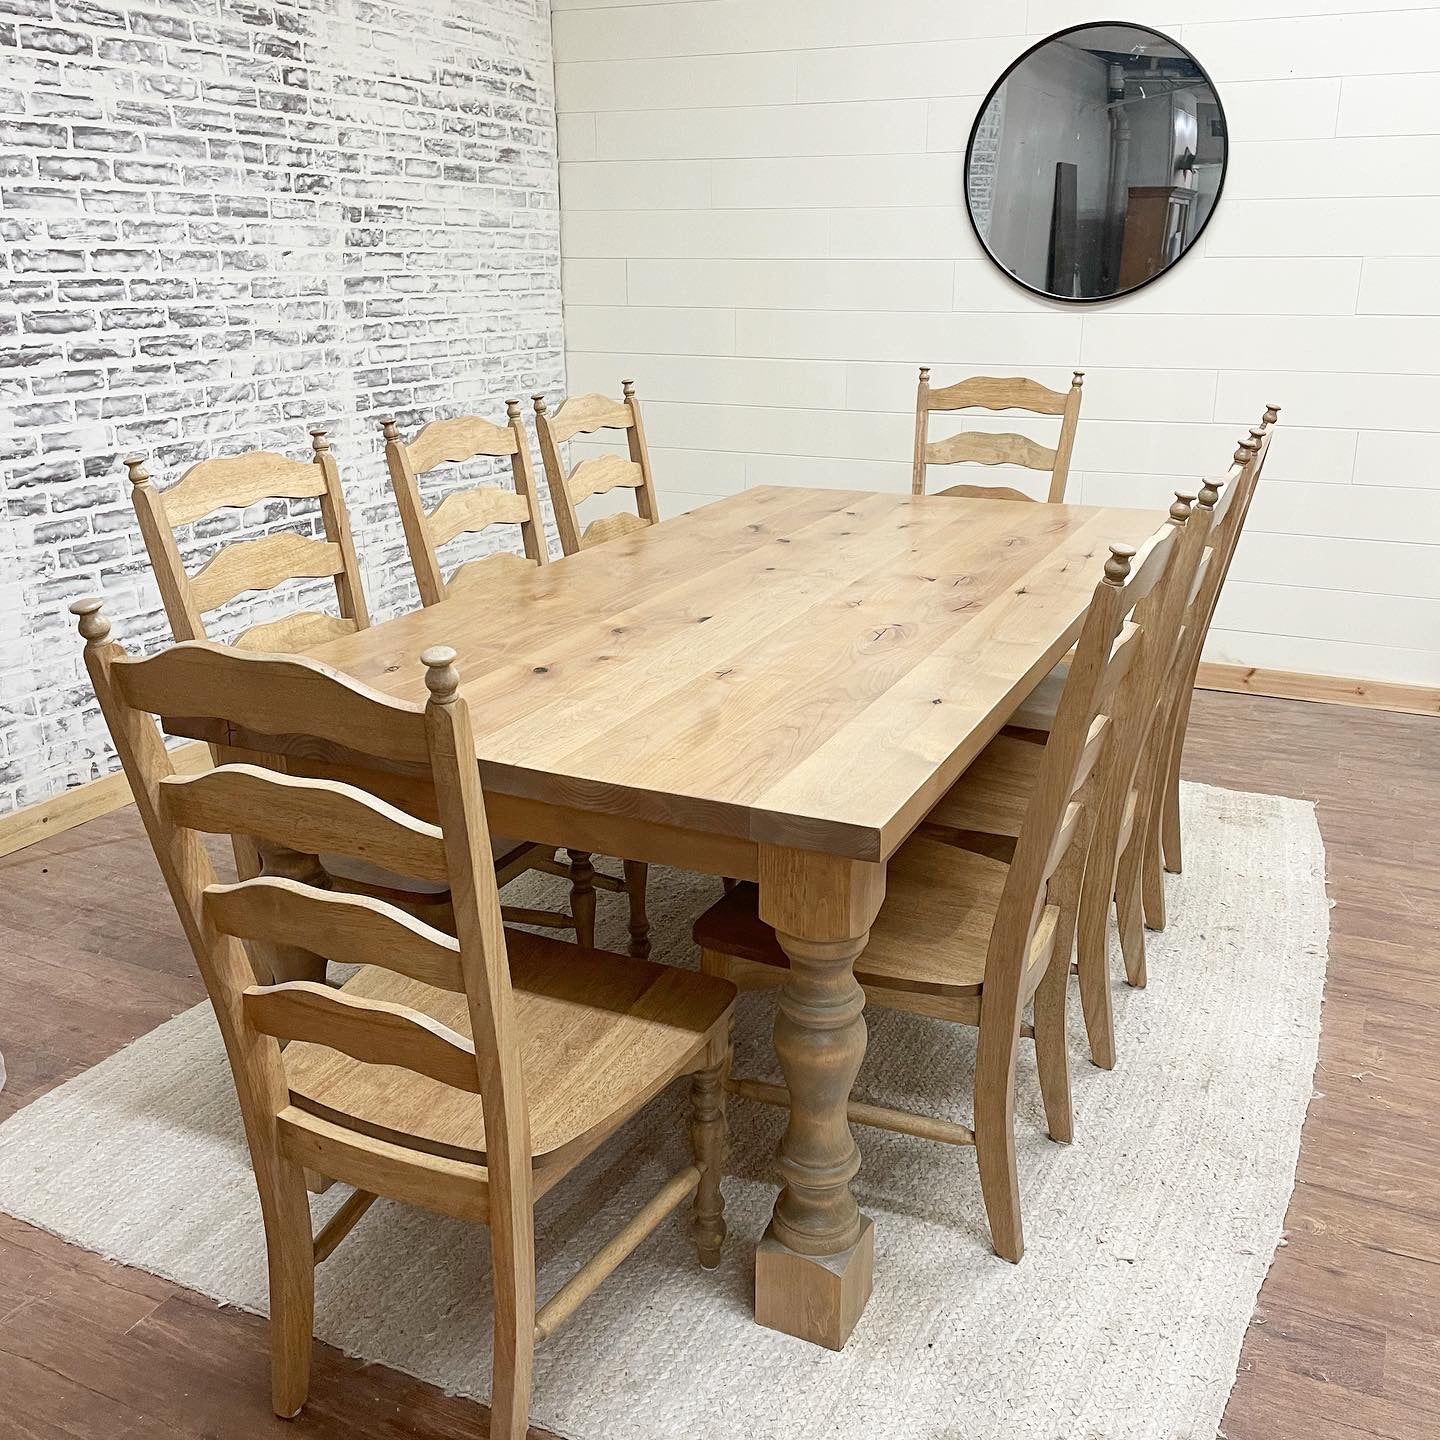 Pictured with an 8' L x 42" W Rustic Alder top and Pine legs stained Weathered Oak. Pictured with 8 Maine Ladder Back Chairs. 